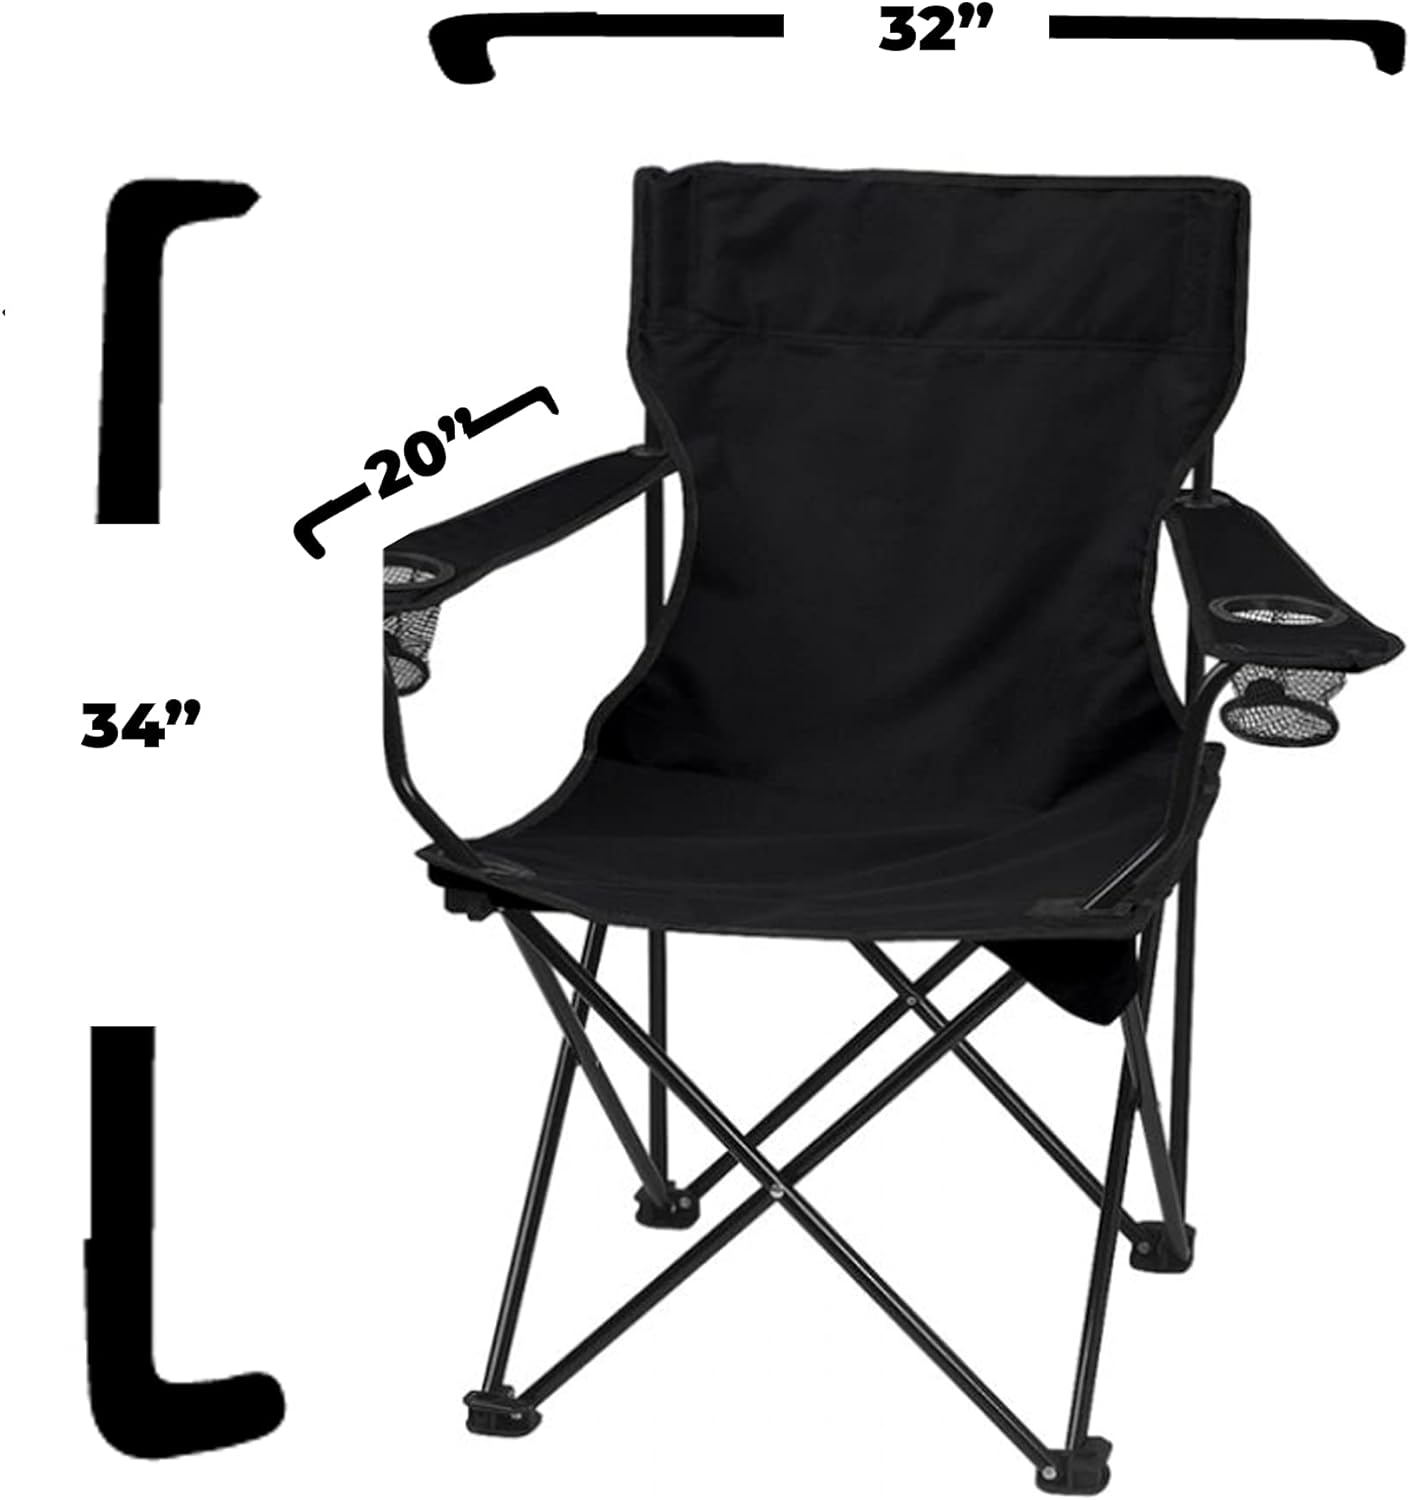 Custom Camping Chair - Black Camping Chair with Carry Bag